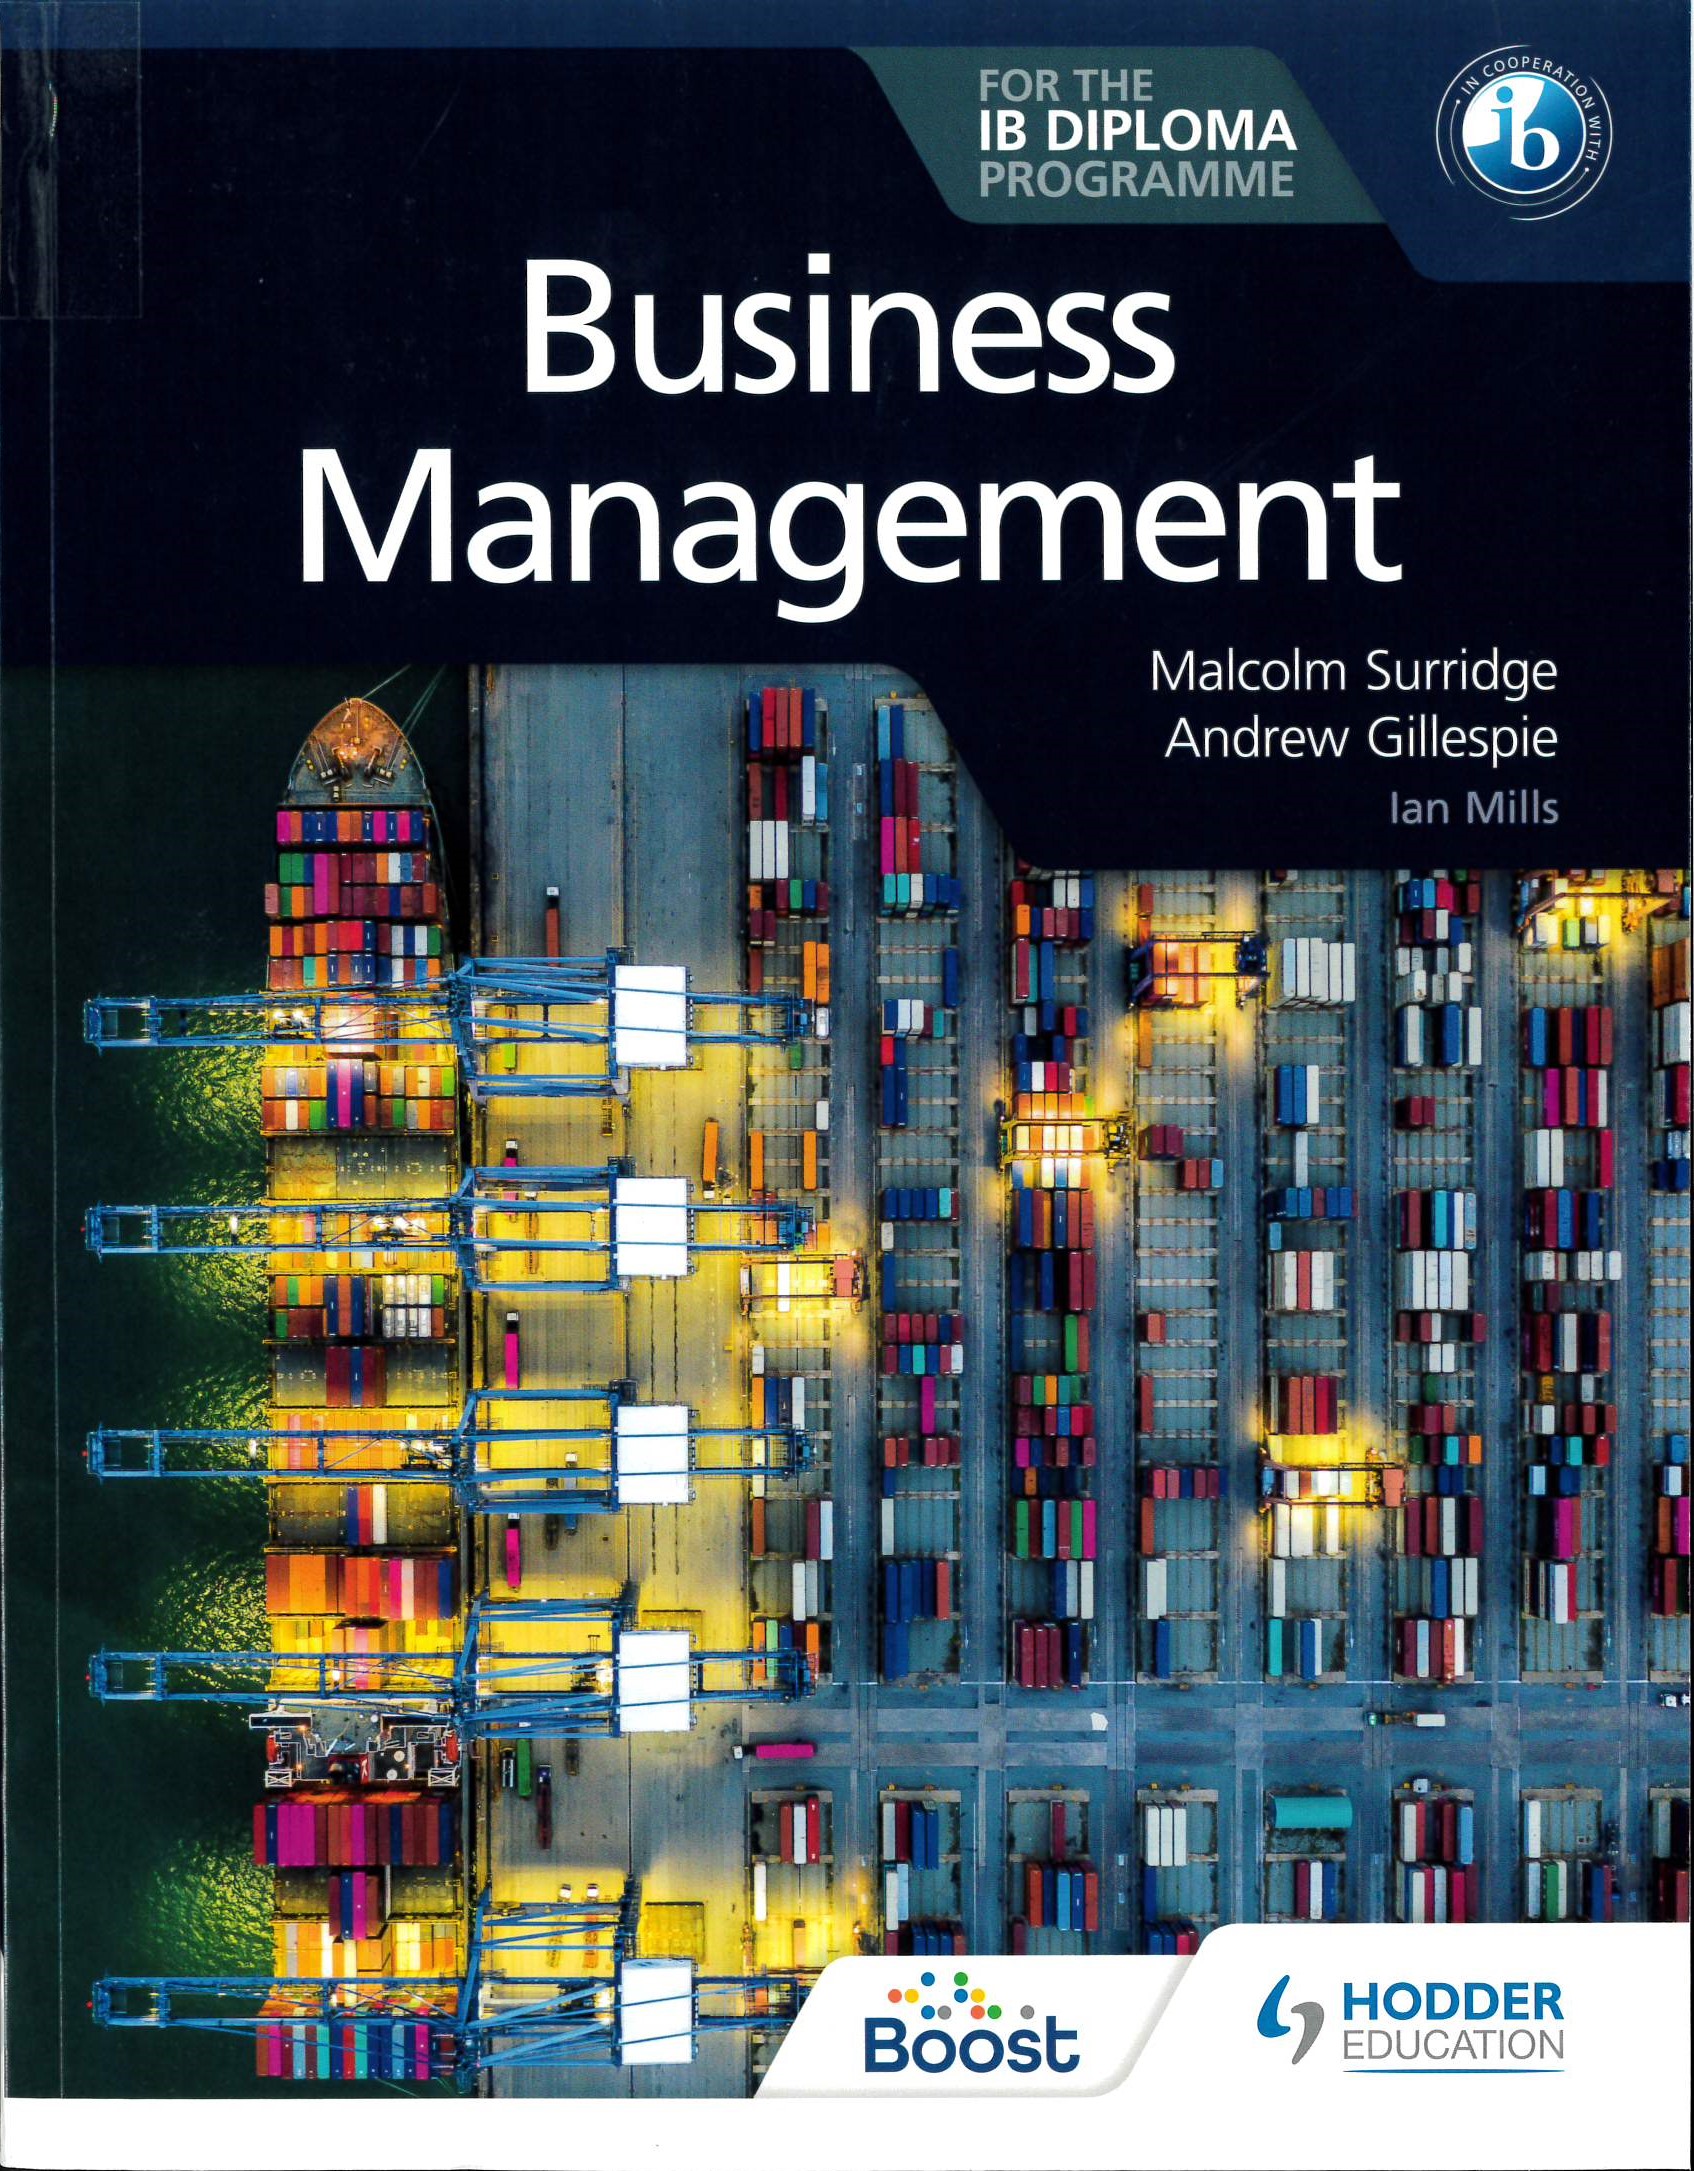 Business and management for the IB diploma